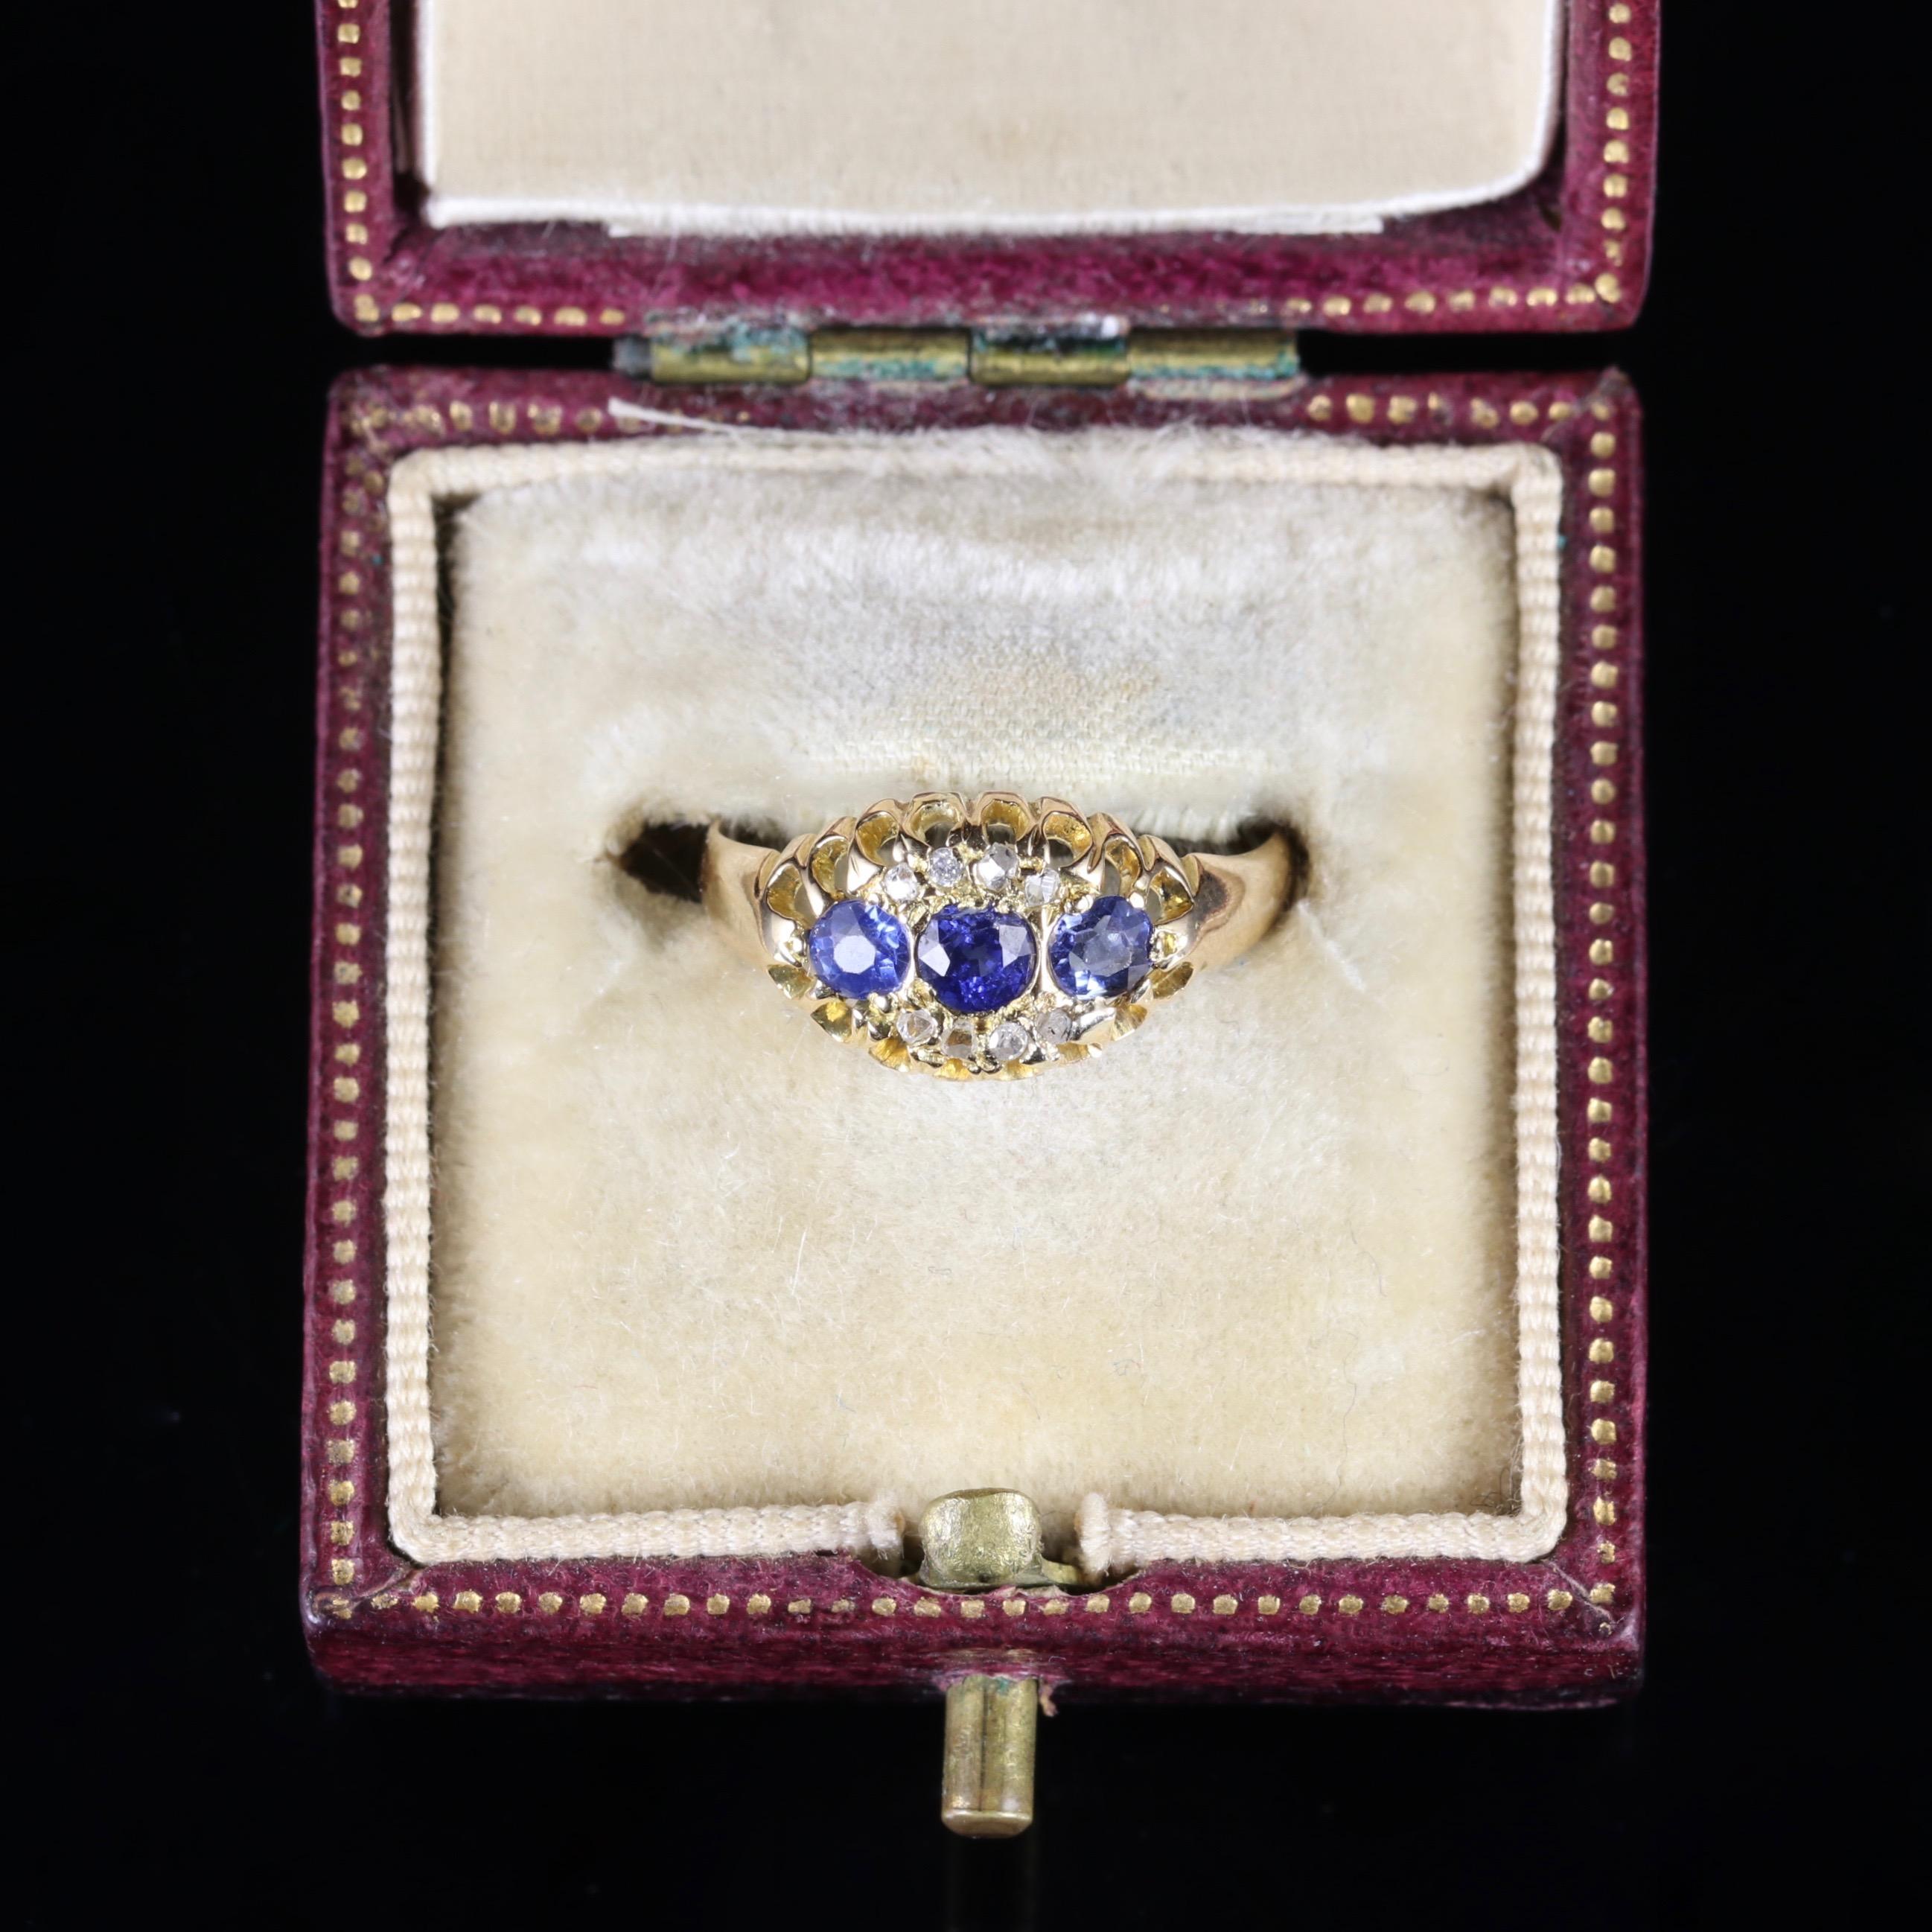 Antique Edwardian Sapphire Diamond Ring 18 Carat Dated Chester, 1903 For Sale 2